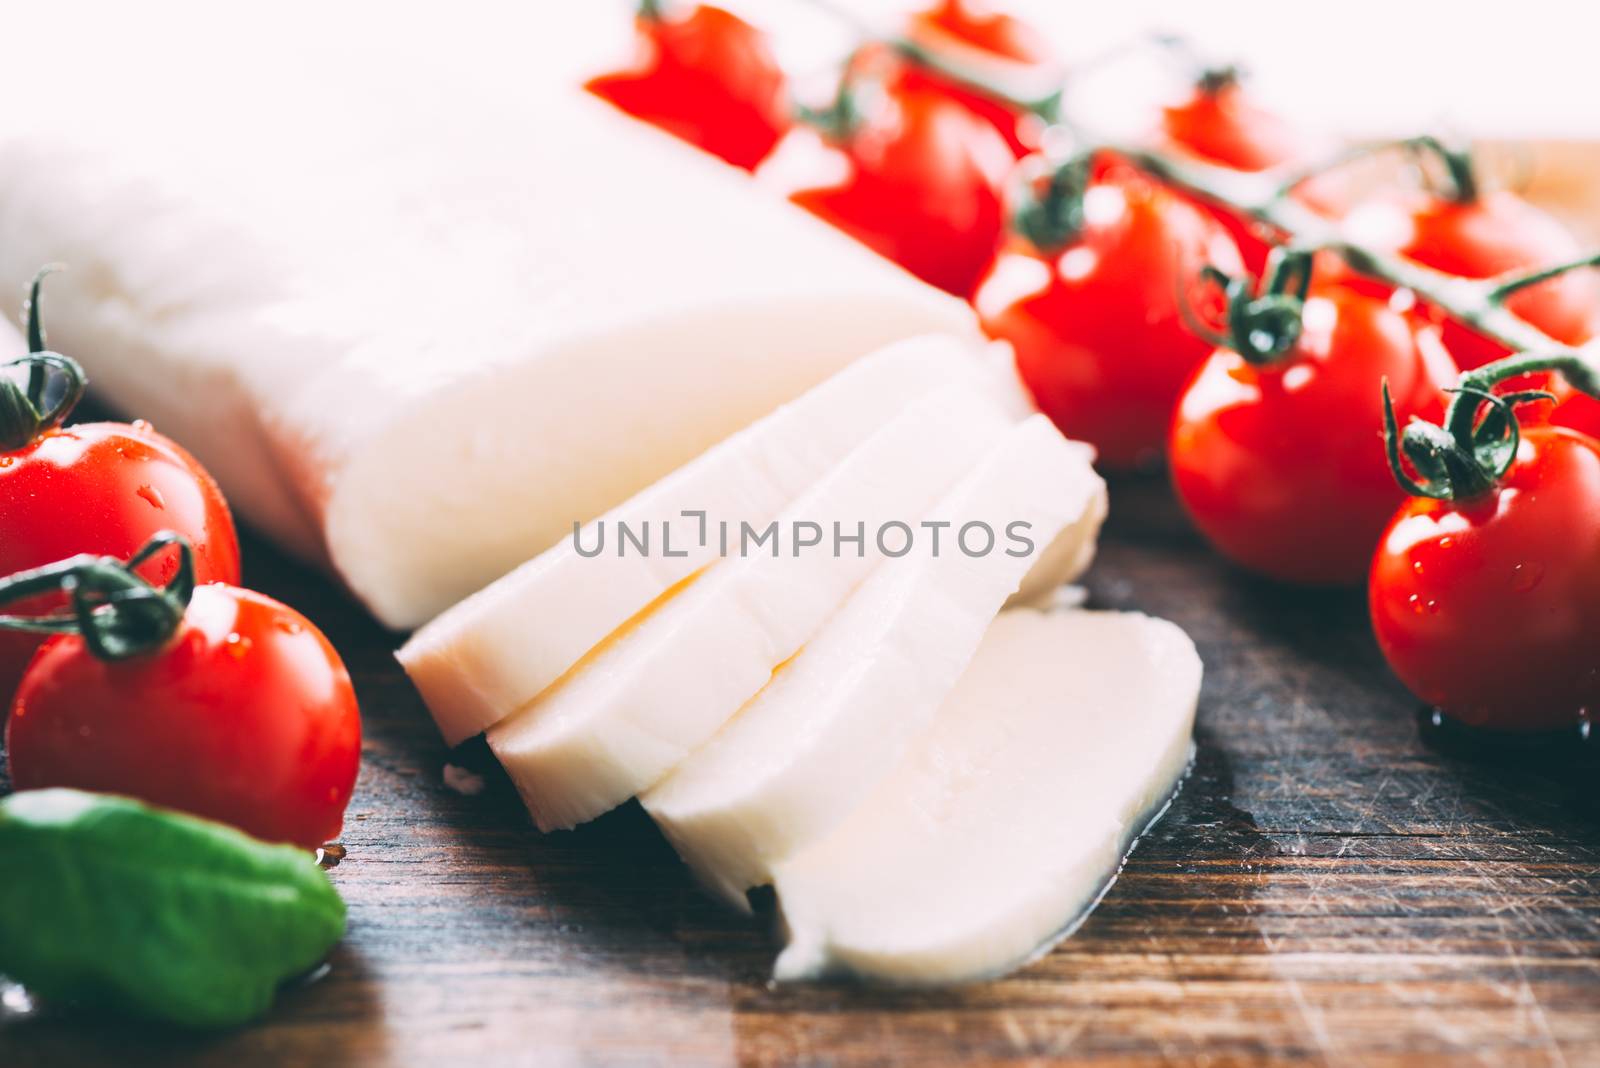 Mozzarella, cherry tomatoes and basil leaves on wooden cutting board by Nanisimova